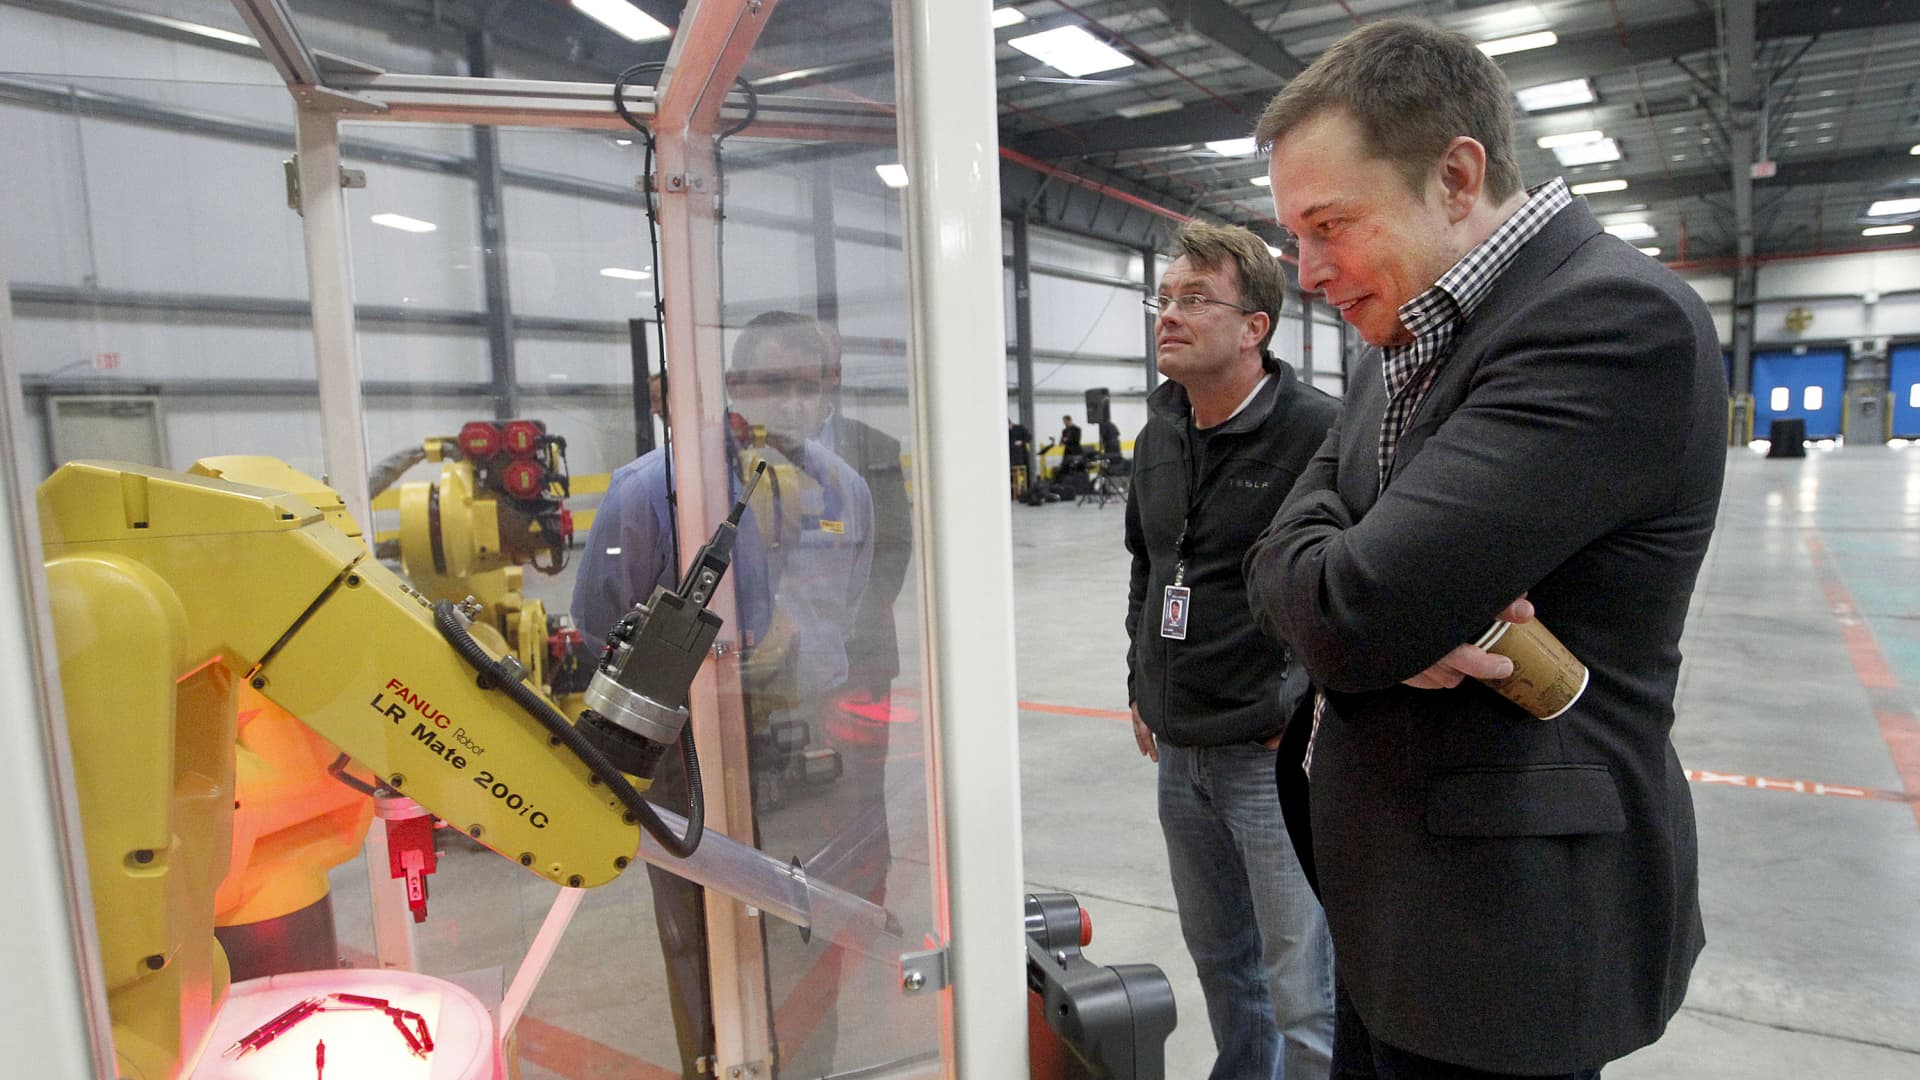 Elon Musk looks at a robot display during a tour of the new Tesla Motors auto plant, formerly operated New United Motor Manufacturing Inc. (NUMMI), in Fremont, California, U.S., on Wednesday, Oct. 27, 2010.